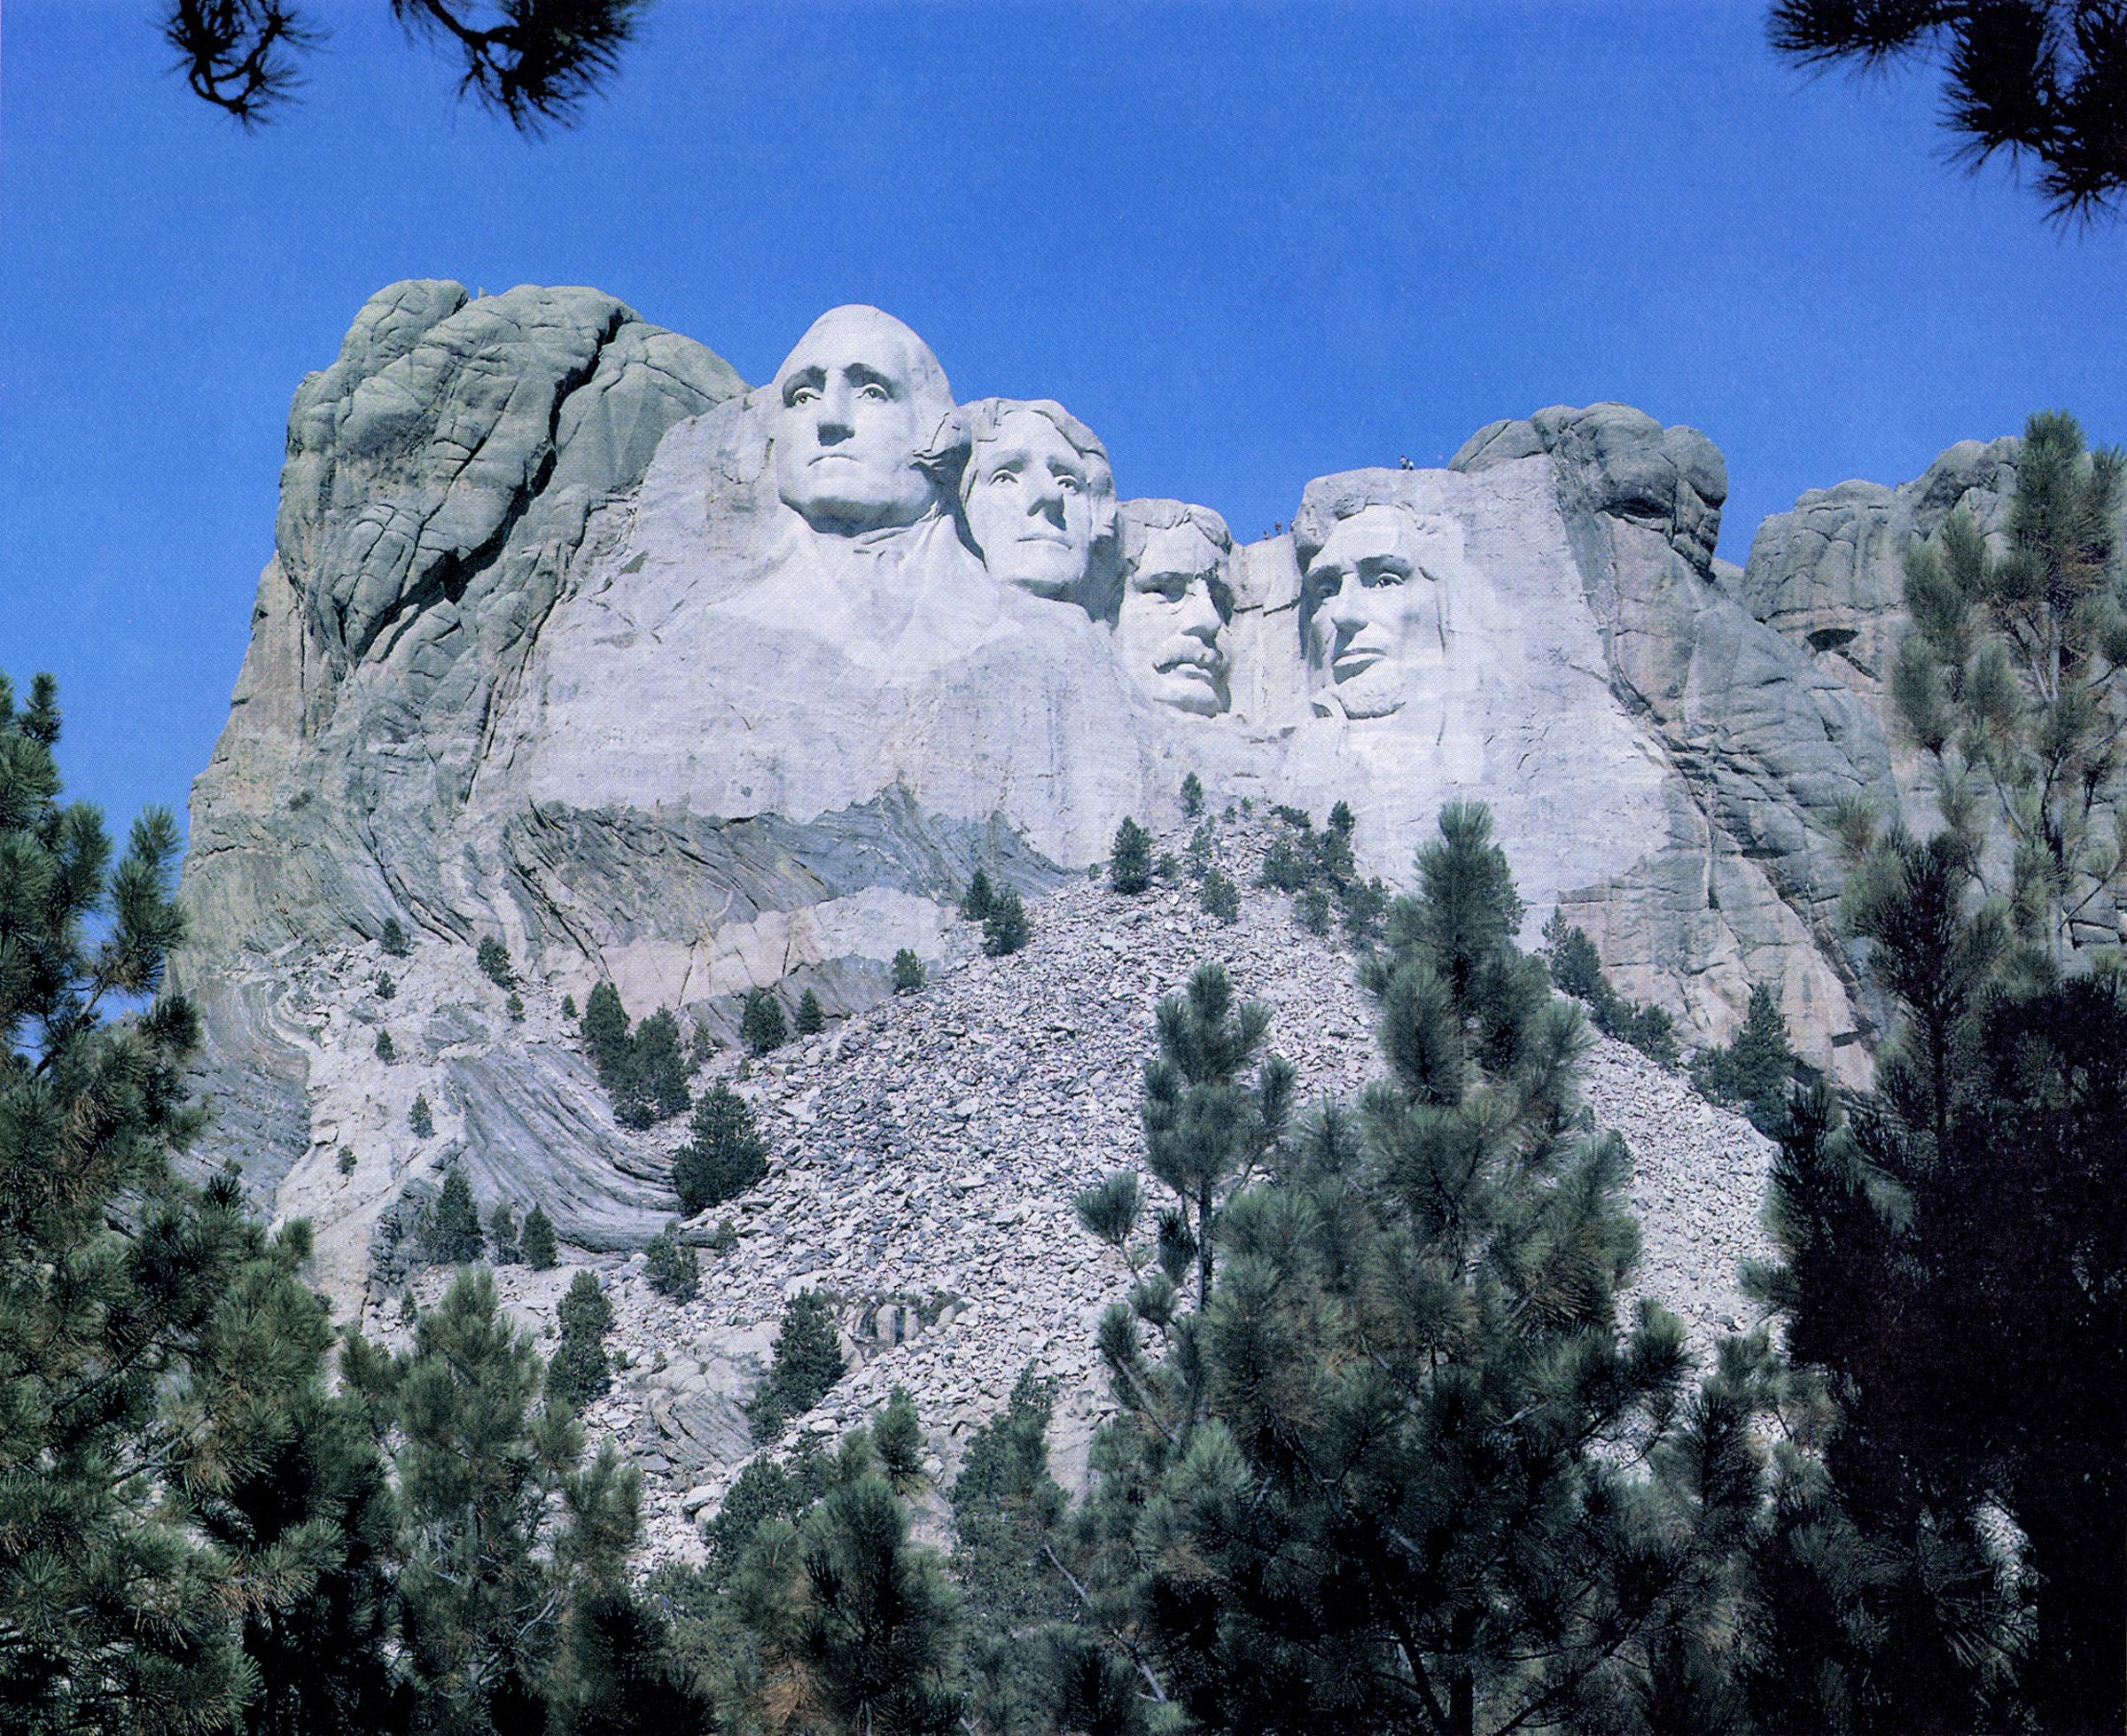 Mount Rushmore, as it appears today, with visitors climbing atop the monument.